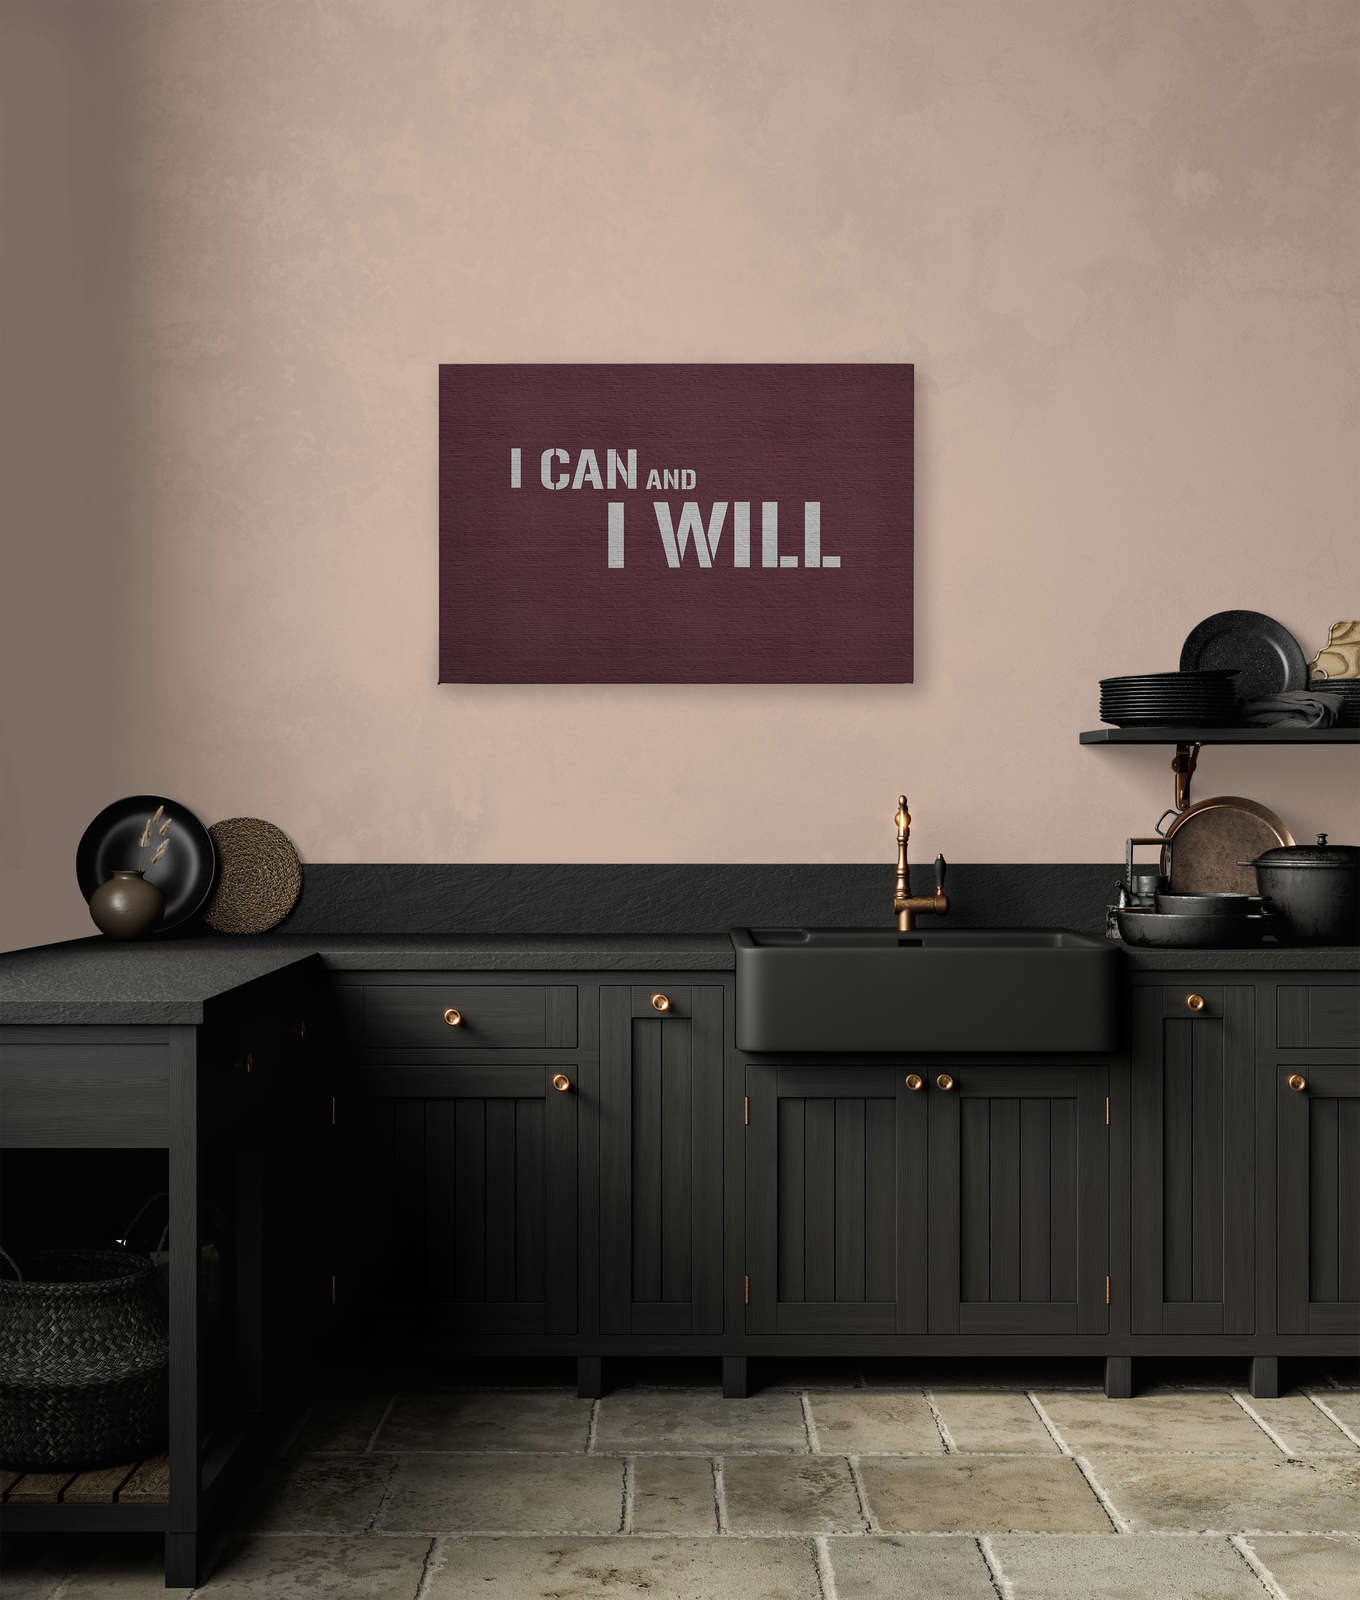             Message 3 - Canvas painting Red brick wall with motivational saying - 0,90 m x 0,60 m
        